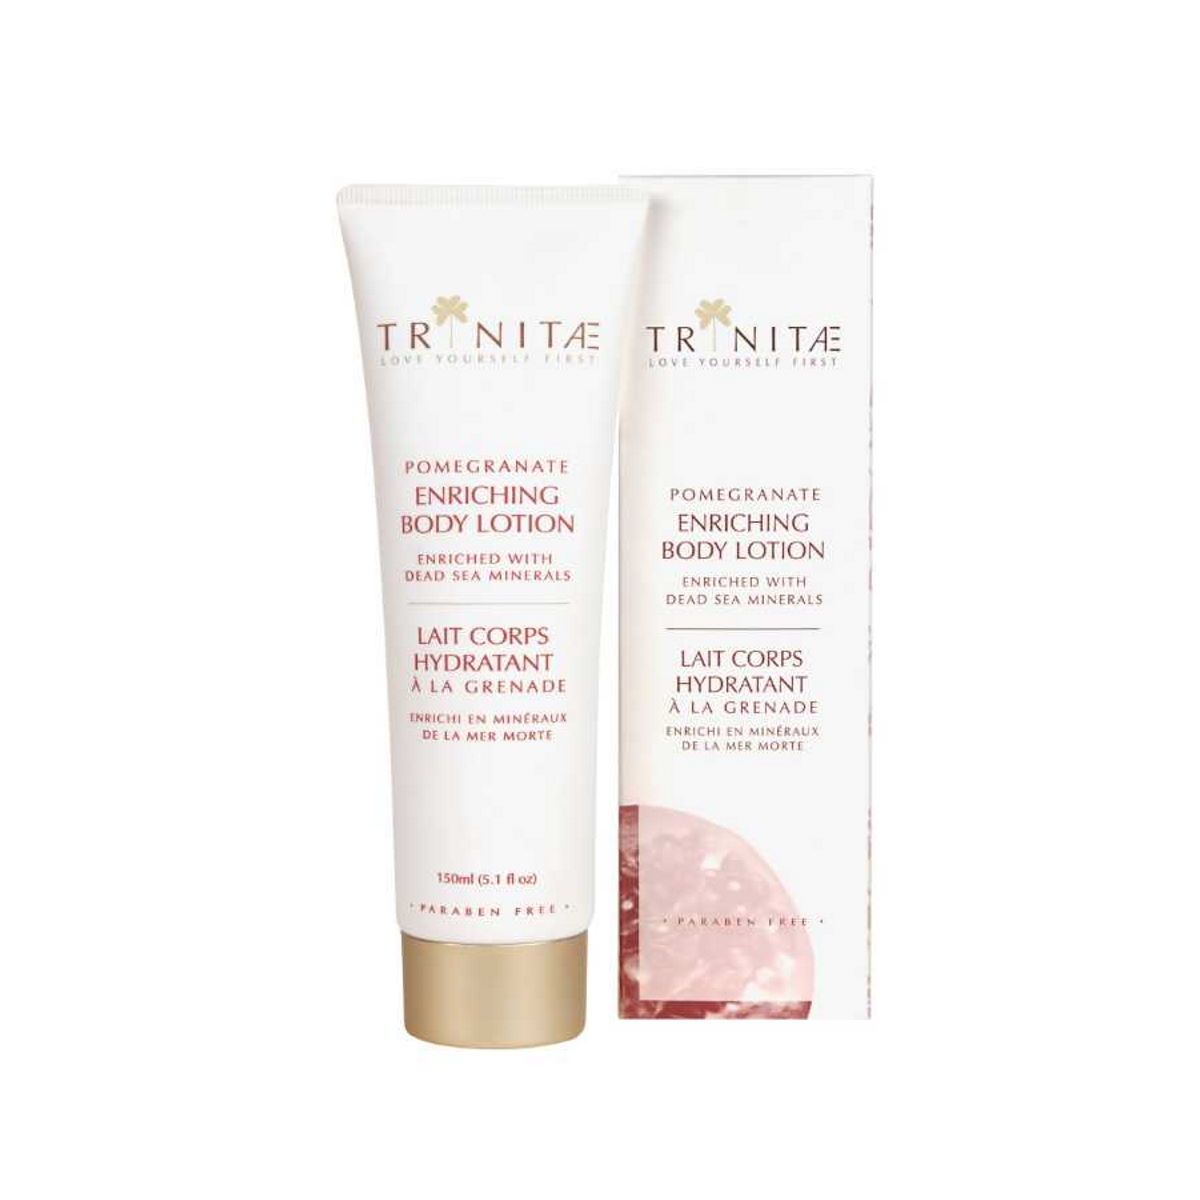 Pomegranate Enriching Body Lotion Enriched with Dead Sea Minerals